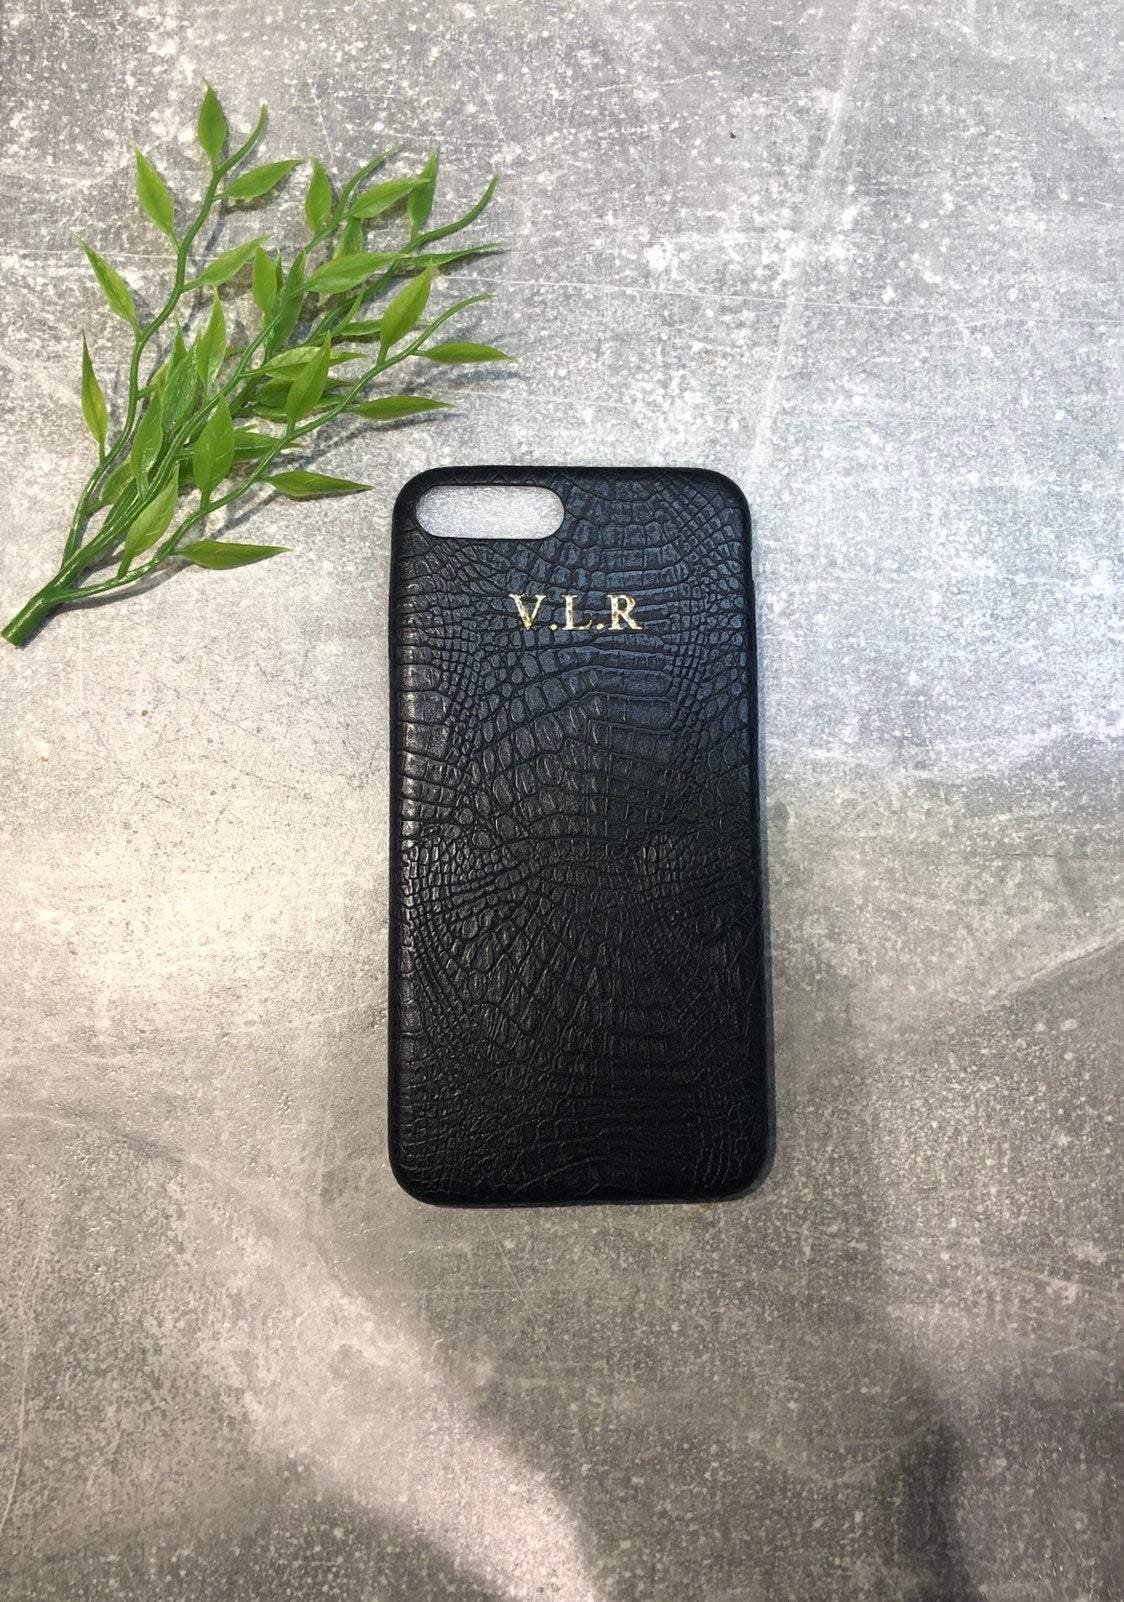 Phone SE 2020 PU leather croc skin style phone case personalised with name or initials. - PersonalisebyLisa